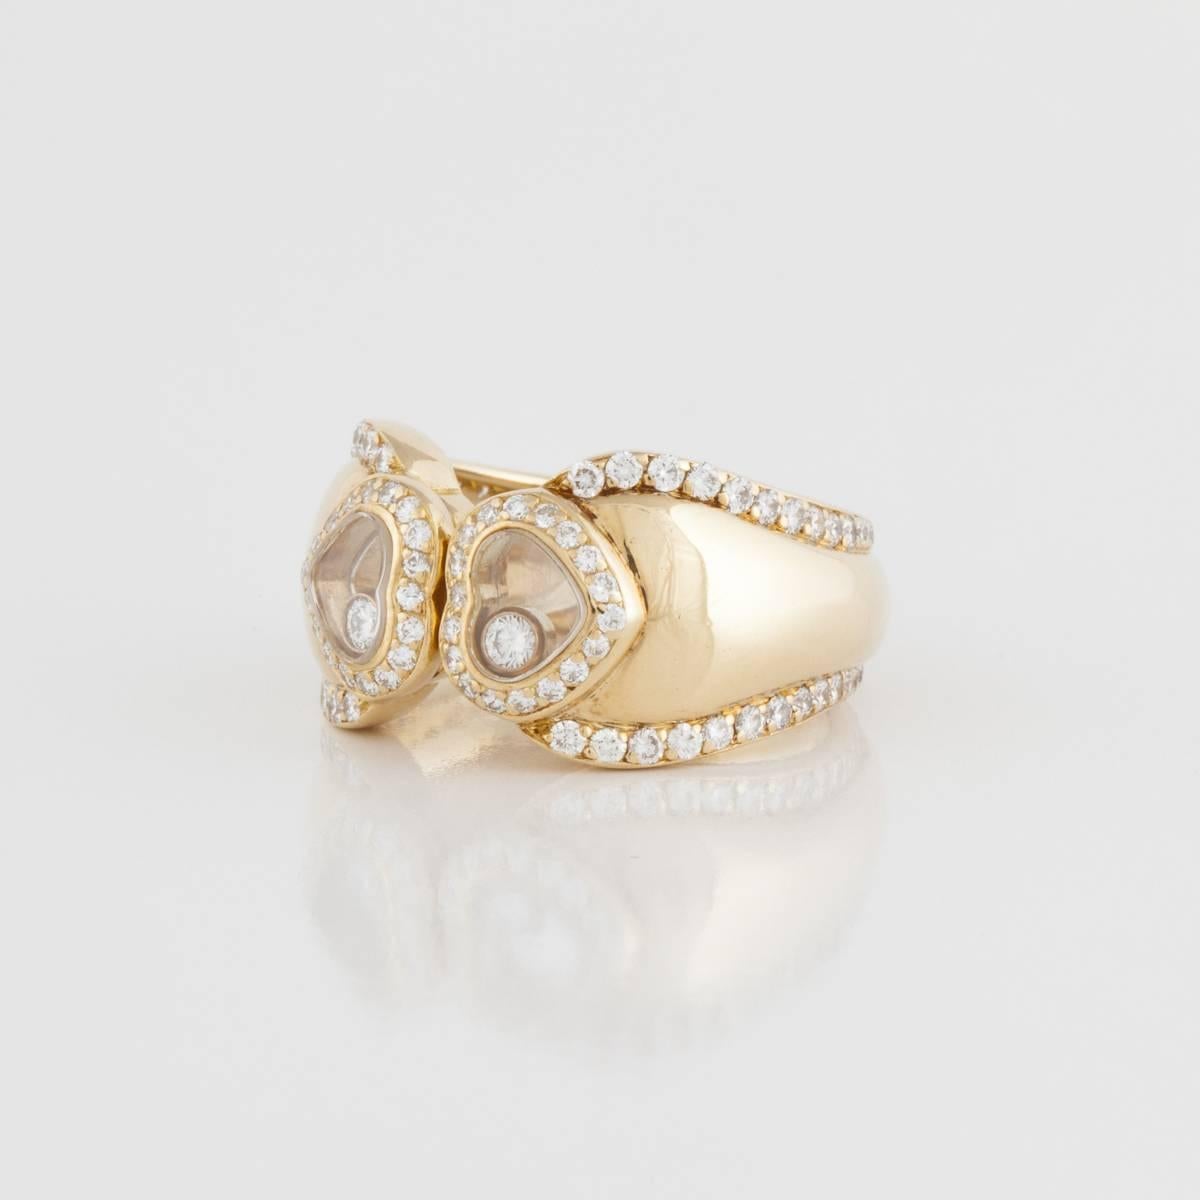 Chopard Happy Diamonds ring in 18K yellow gold marked 